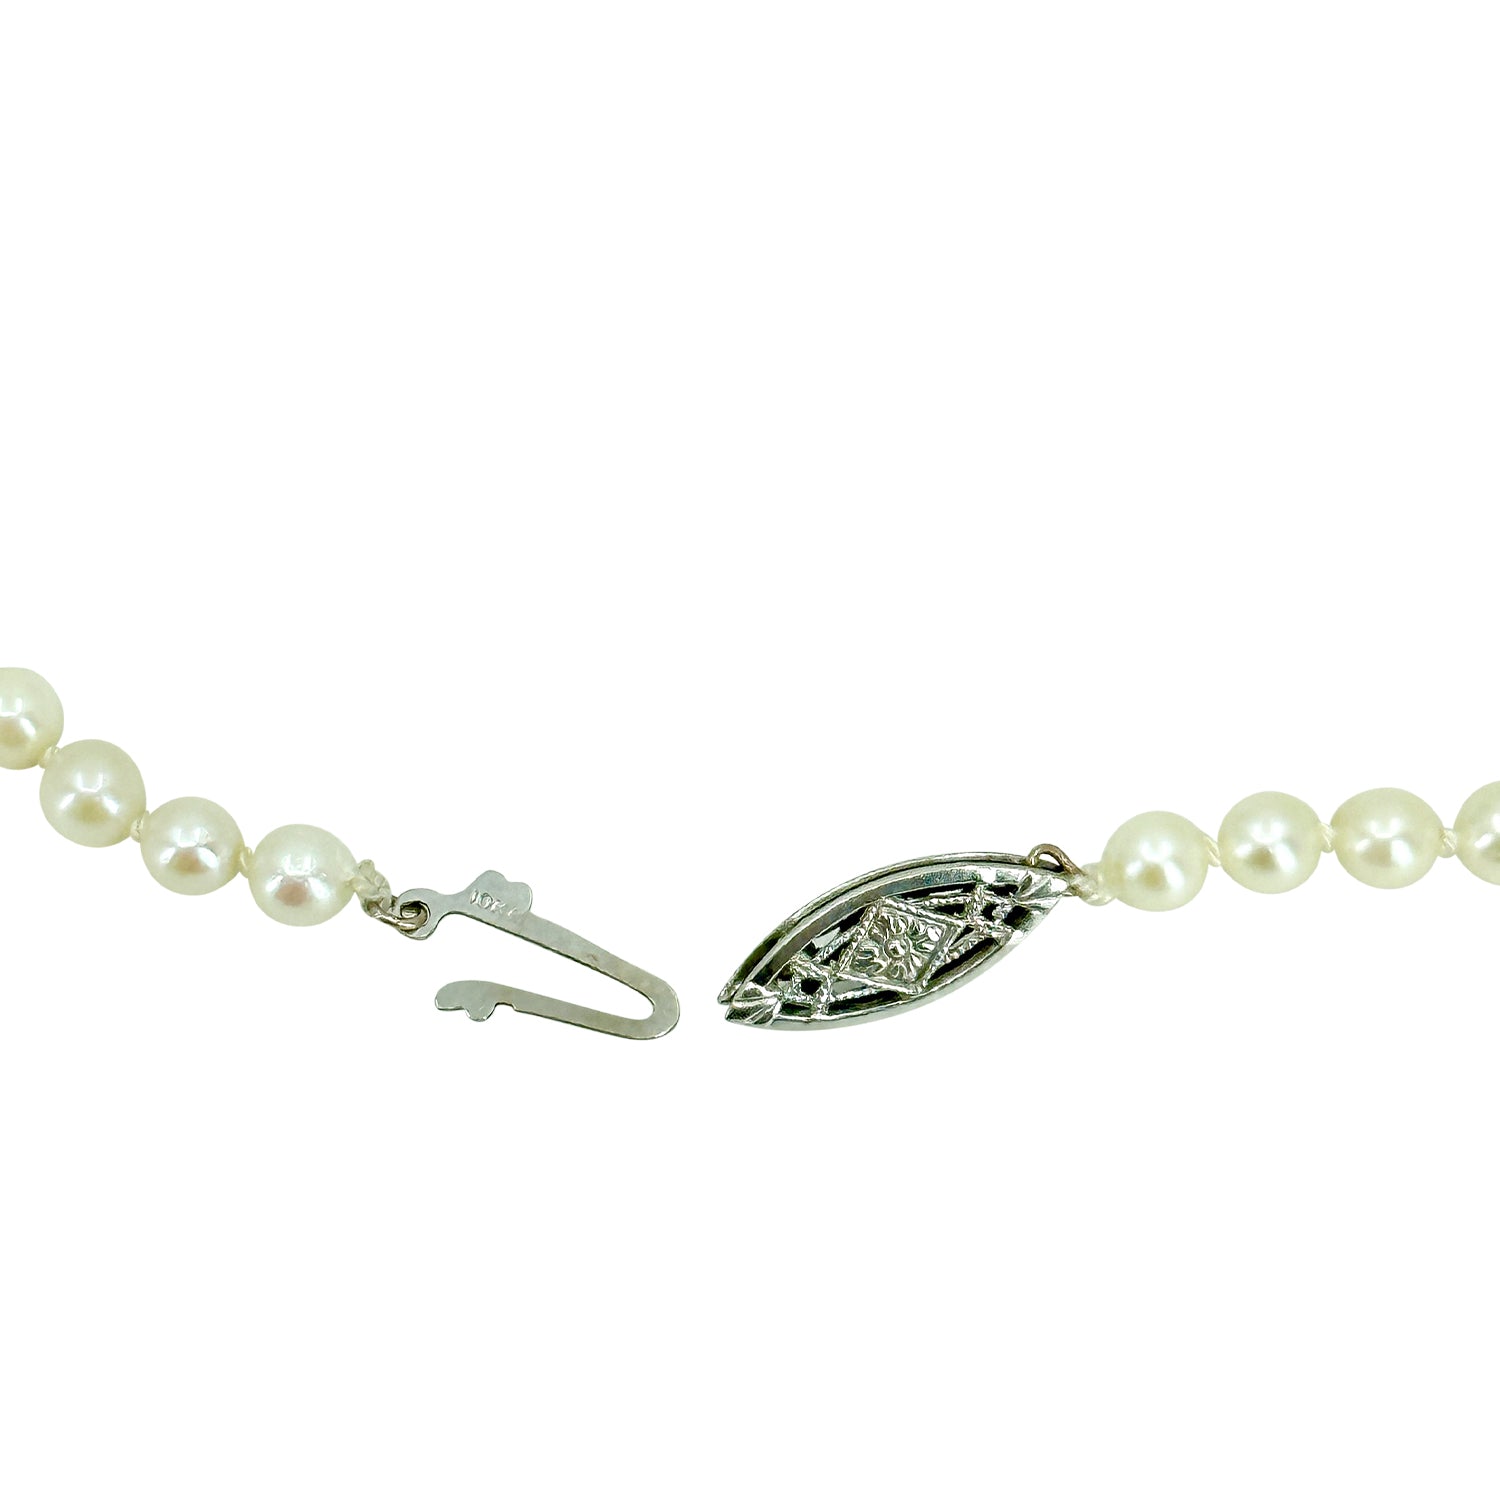 Mid-Century Floral Japanese Saltwater Akoya Cultured Pearl Necklace - 10K White Gold 17 Inch